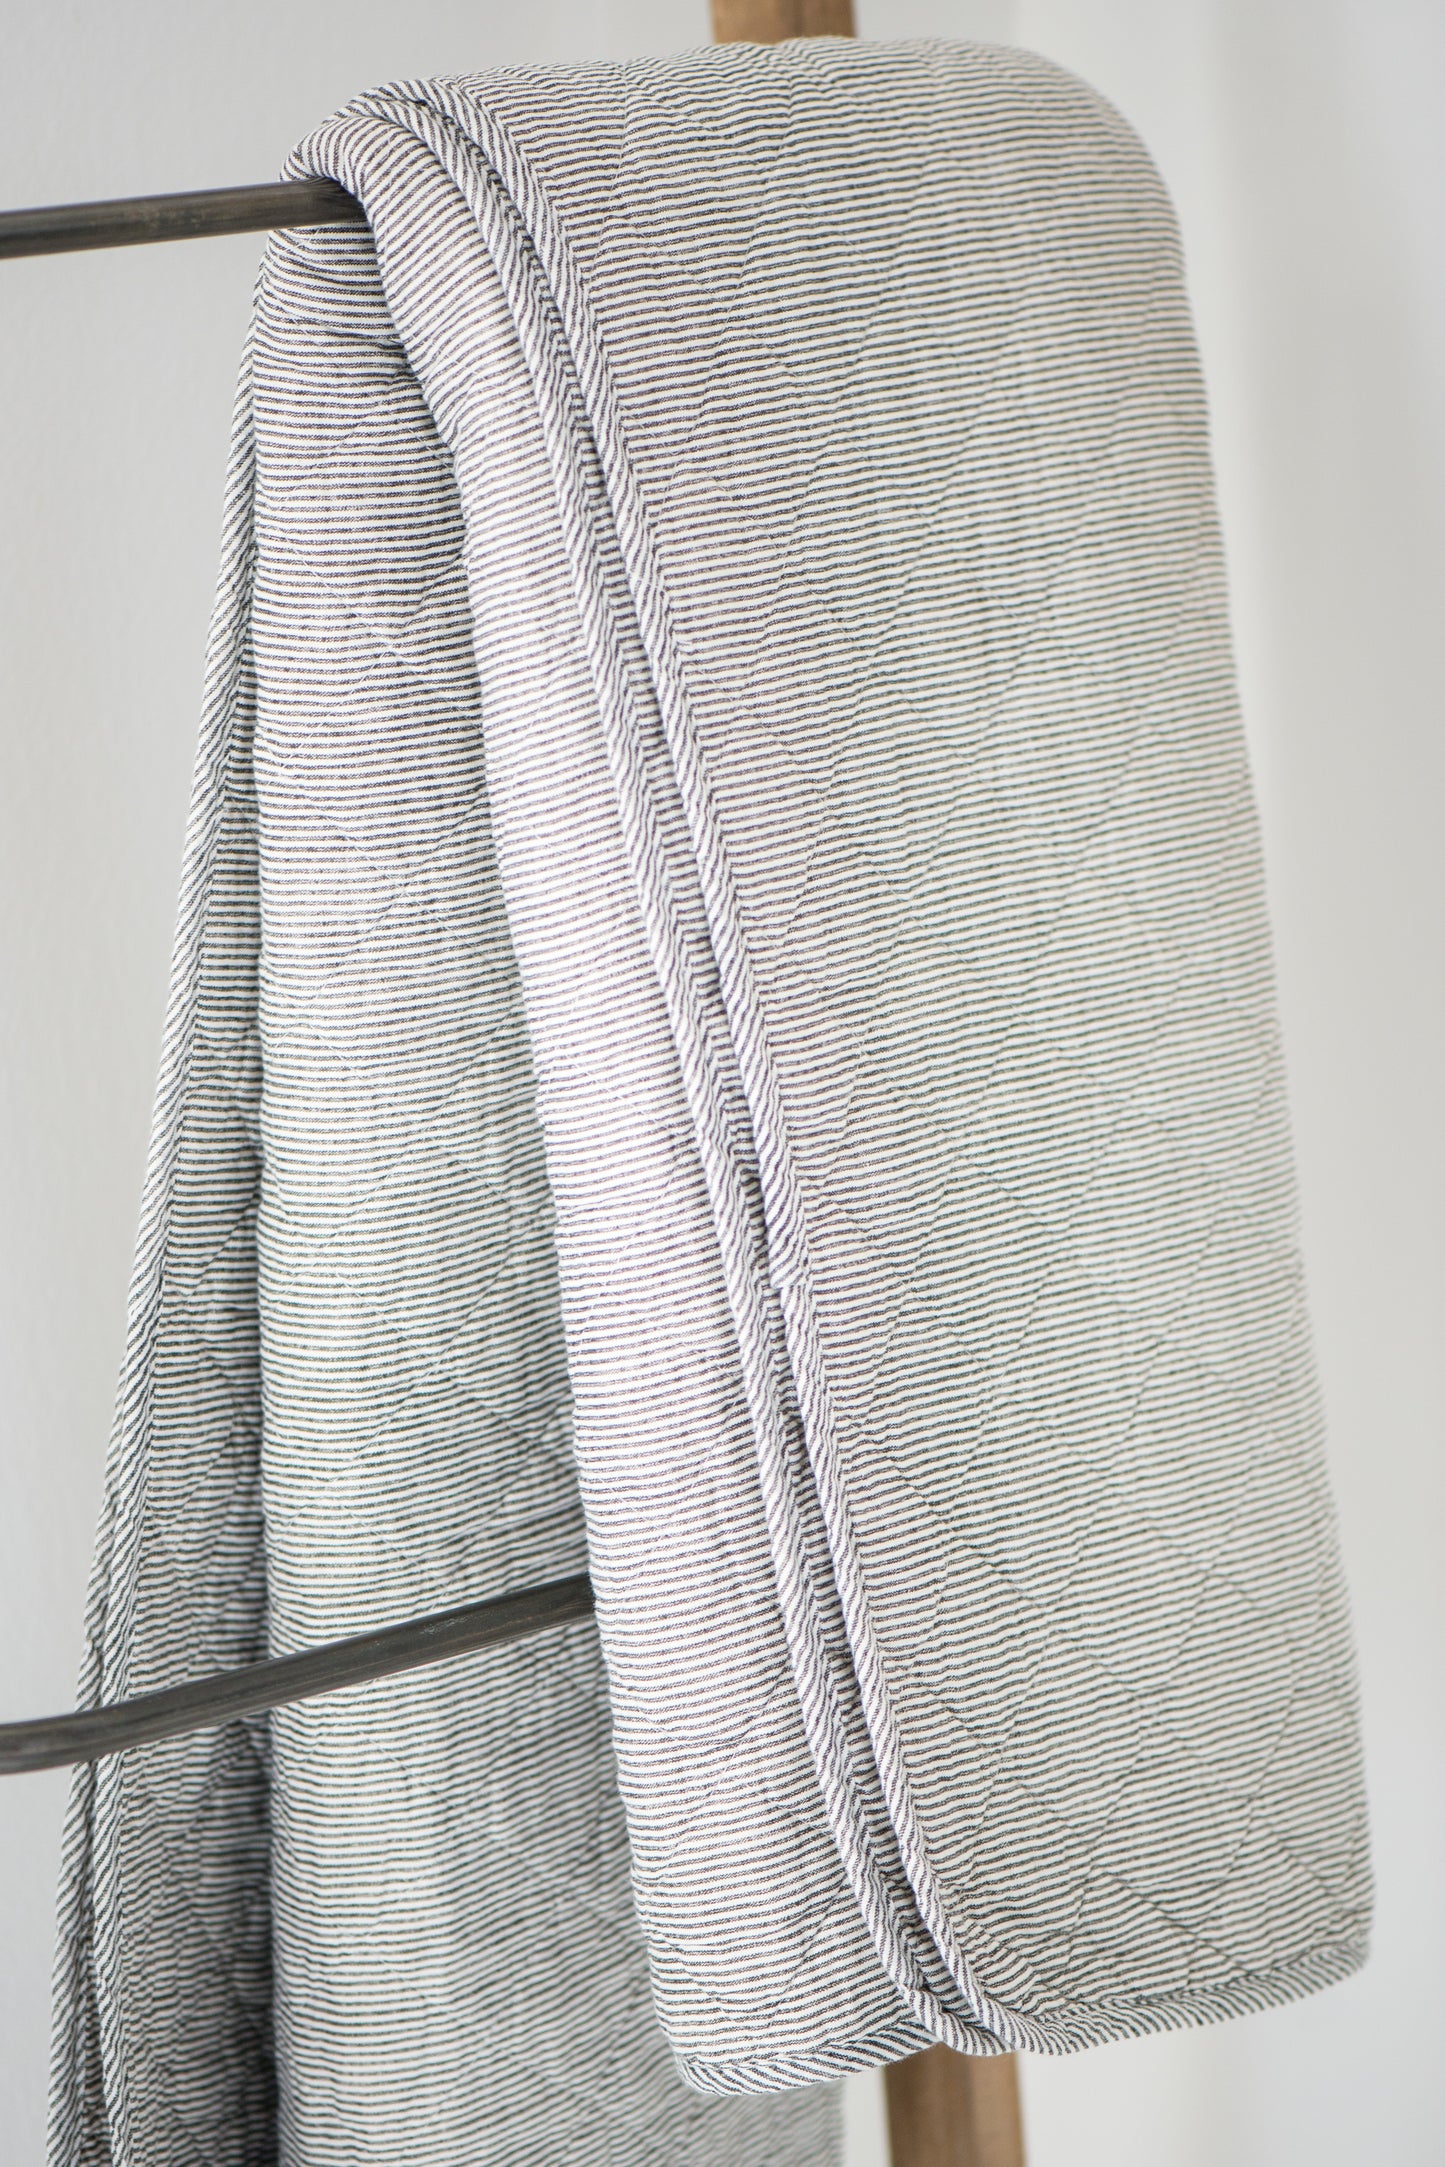 Quilt with Grey Stripe